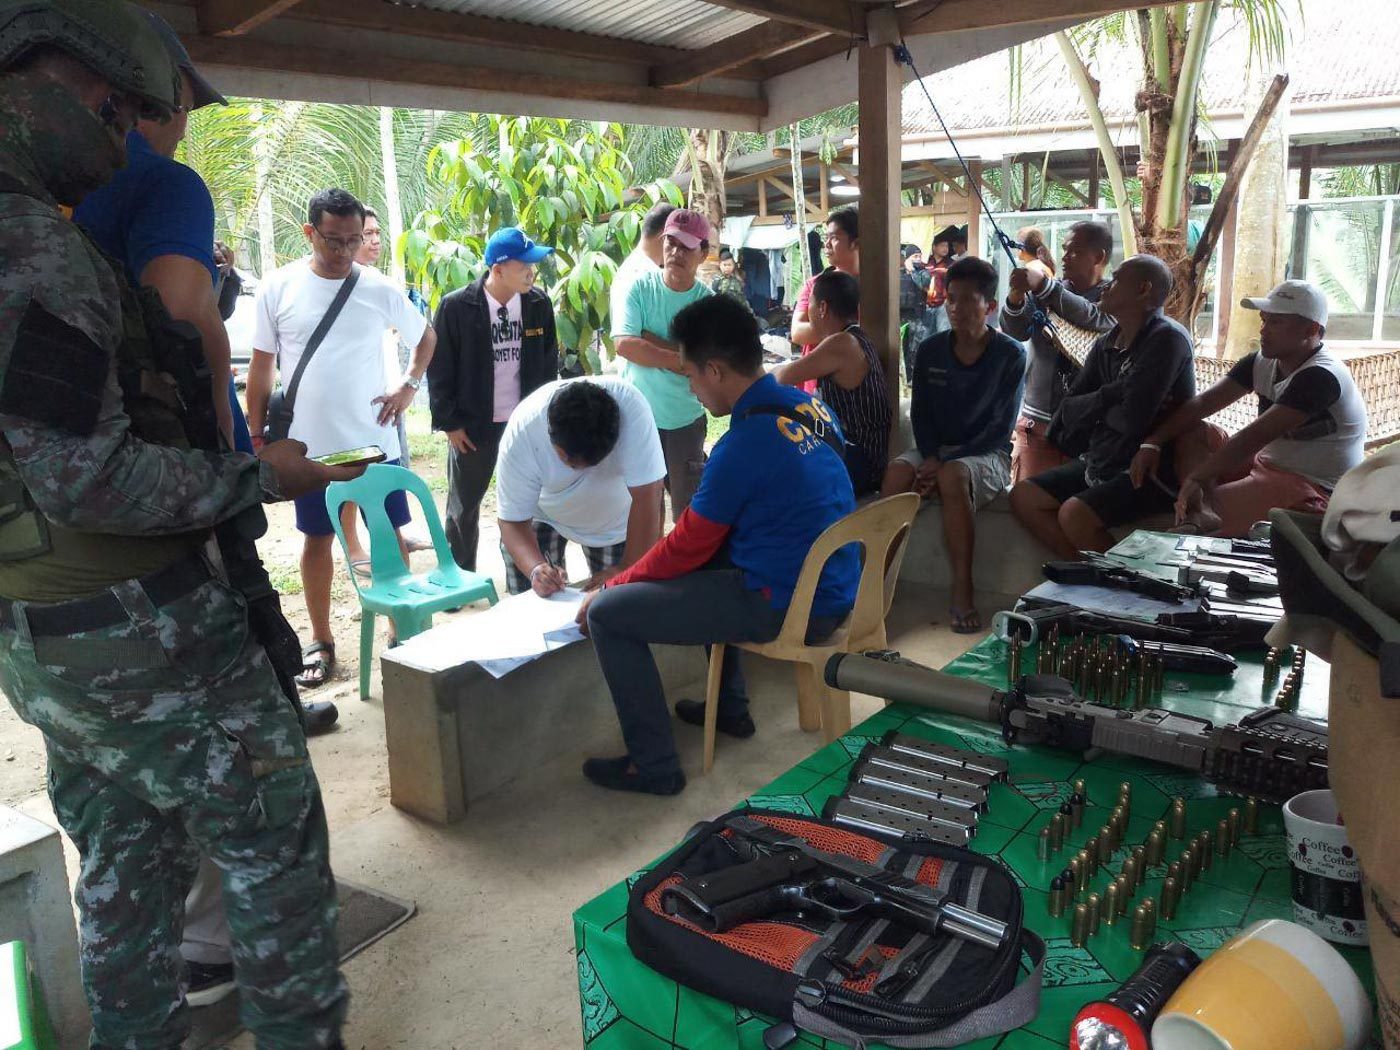 Agusan del Sur mayoral bet arrested over firearms